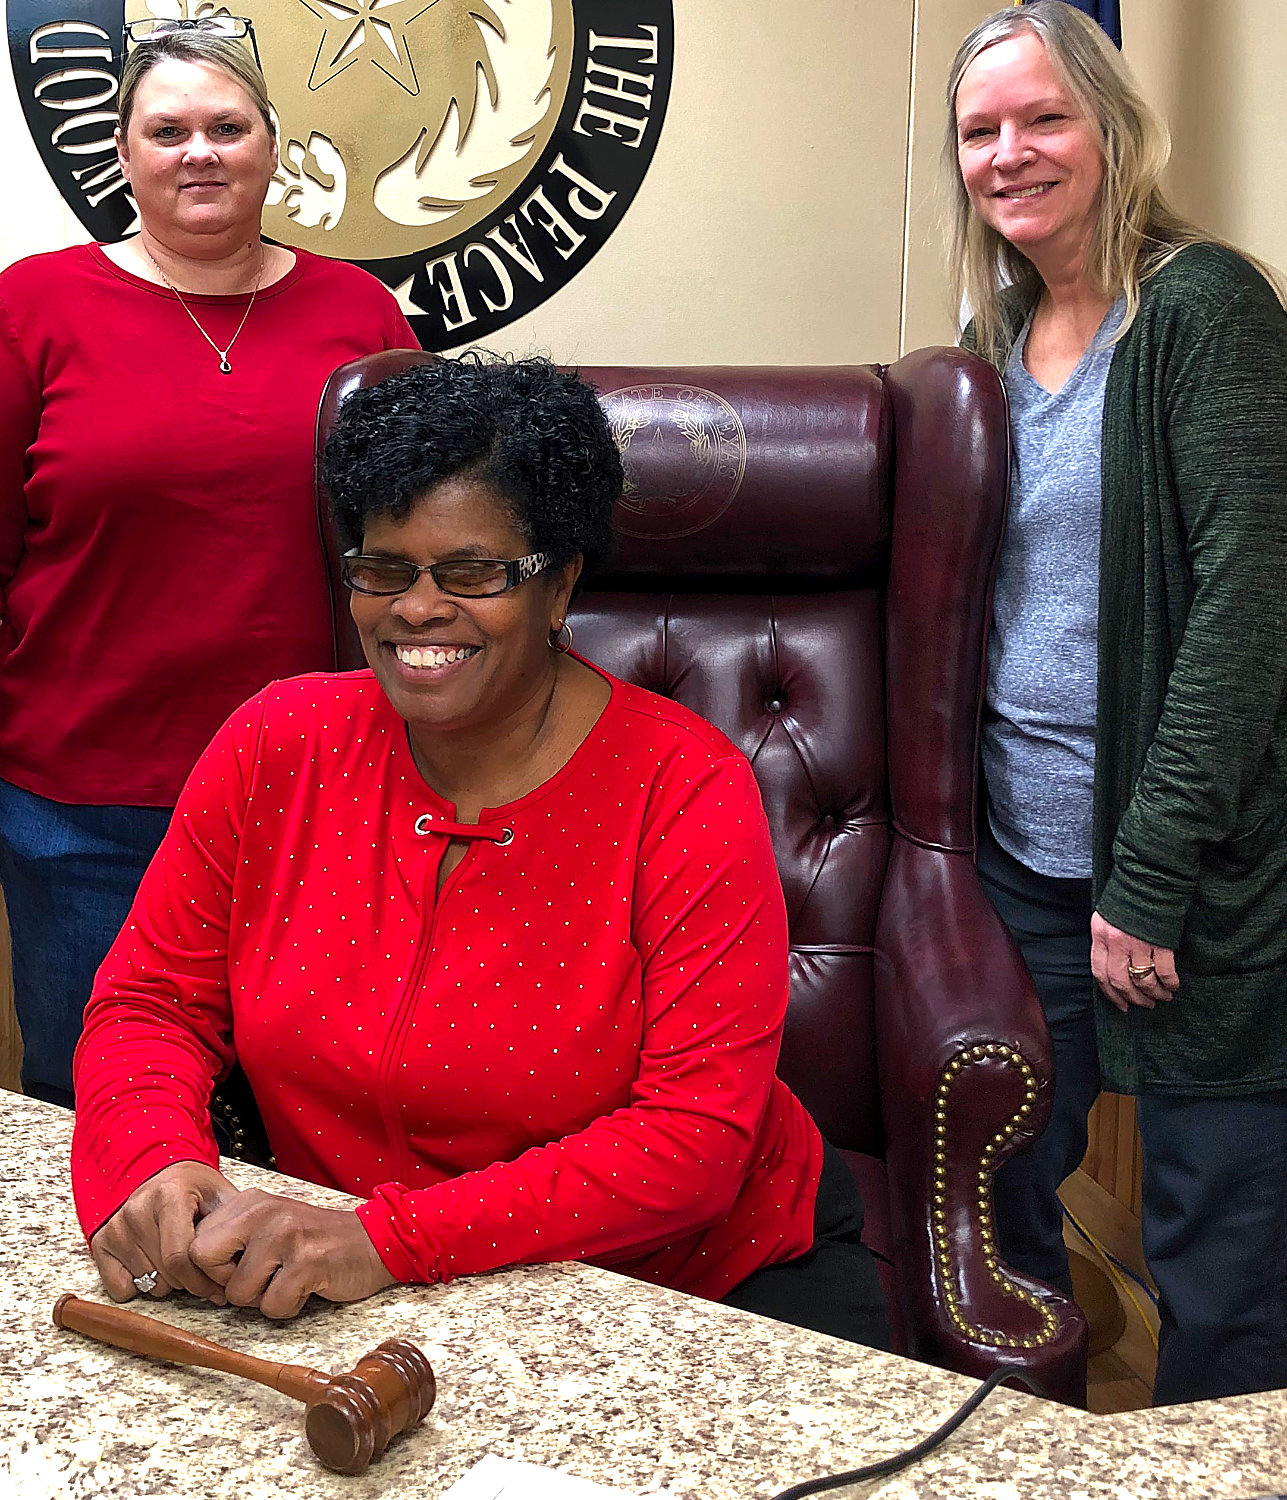 Justice of the Peace Janae Holland, seated, with staff members Monica Bailey and Anita Piper.